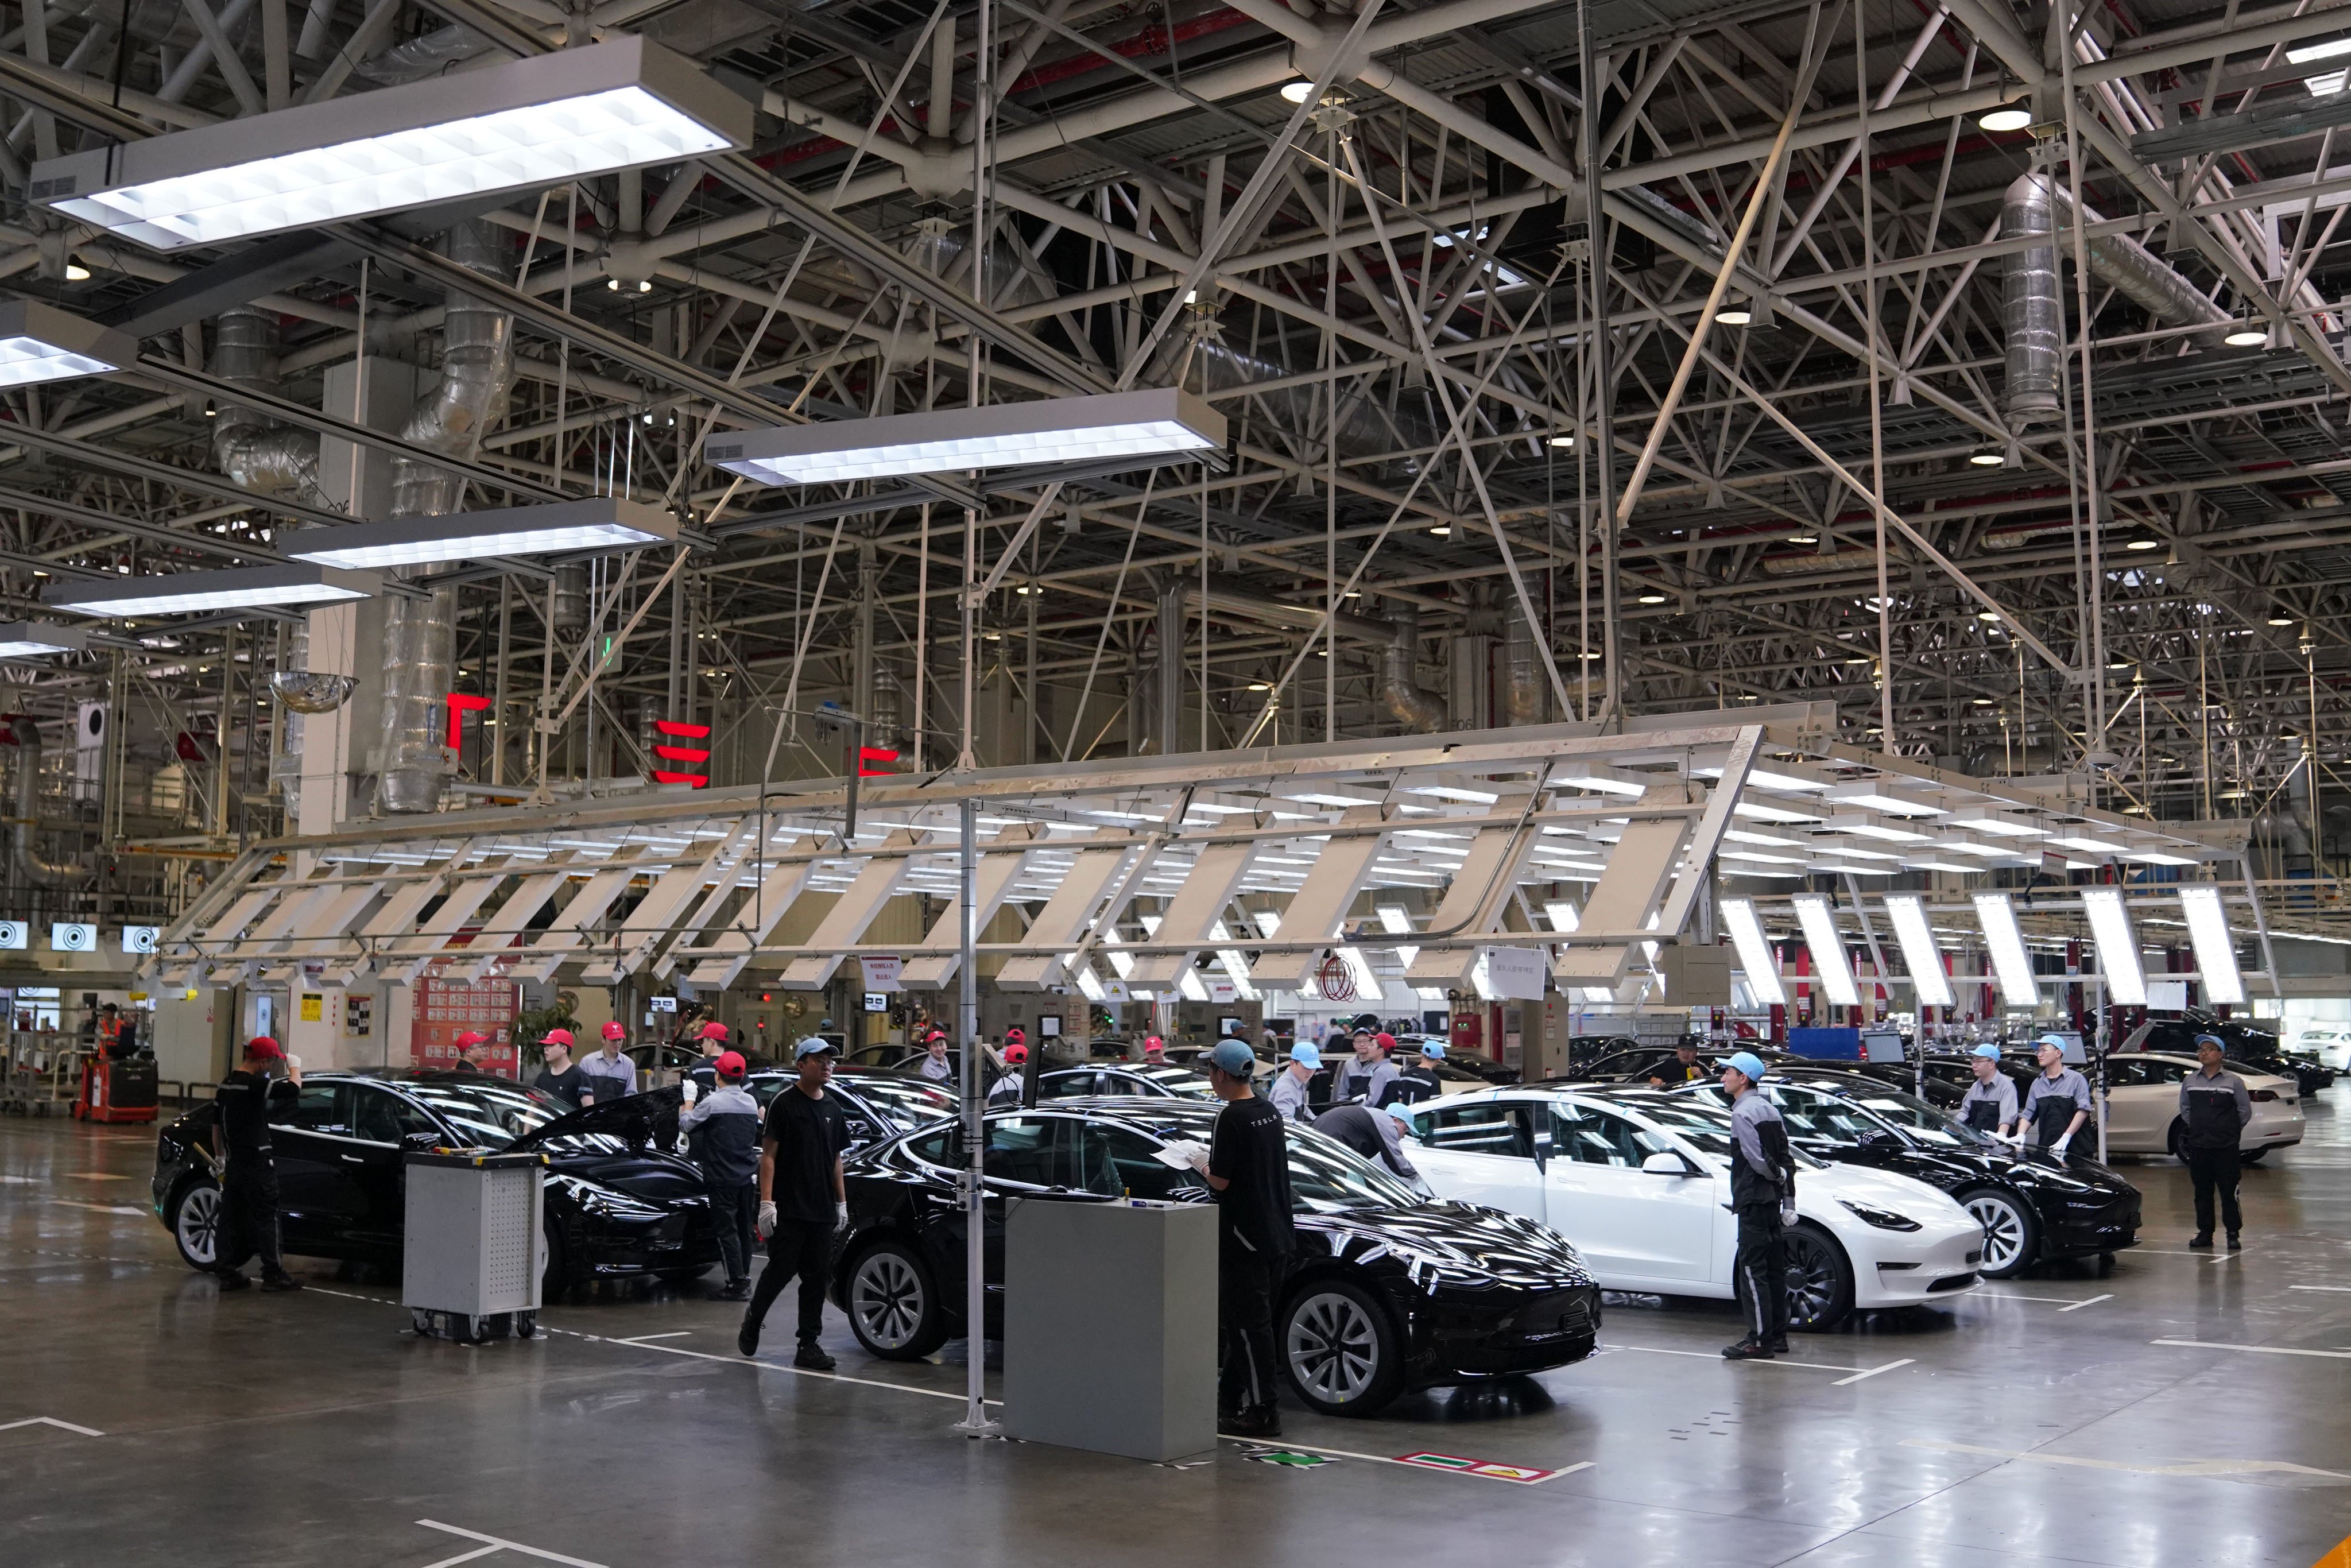 Only a few dozen employees at the Gigafactory 3 were told to leave, a tiny portion of the assembly workforce, say two people with knowledge. Photo: Xinhua